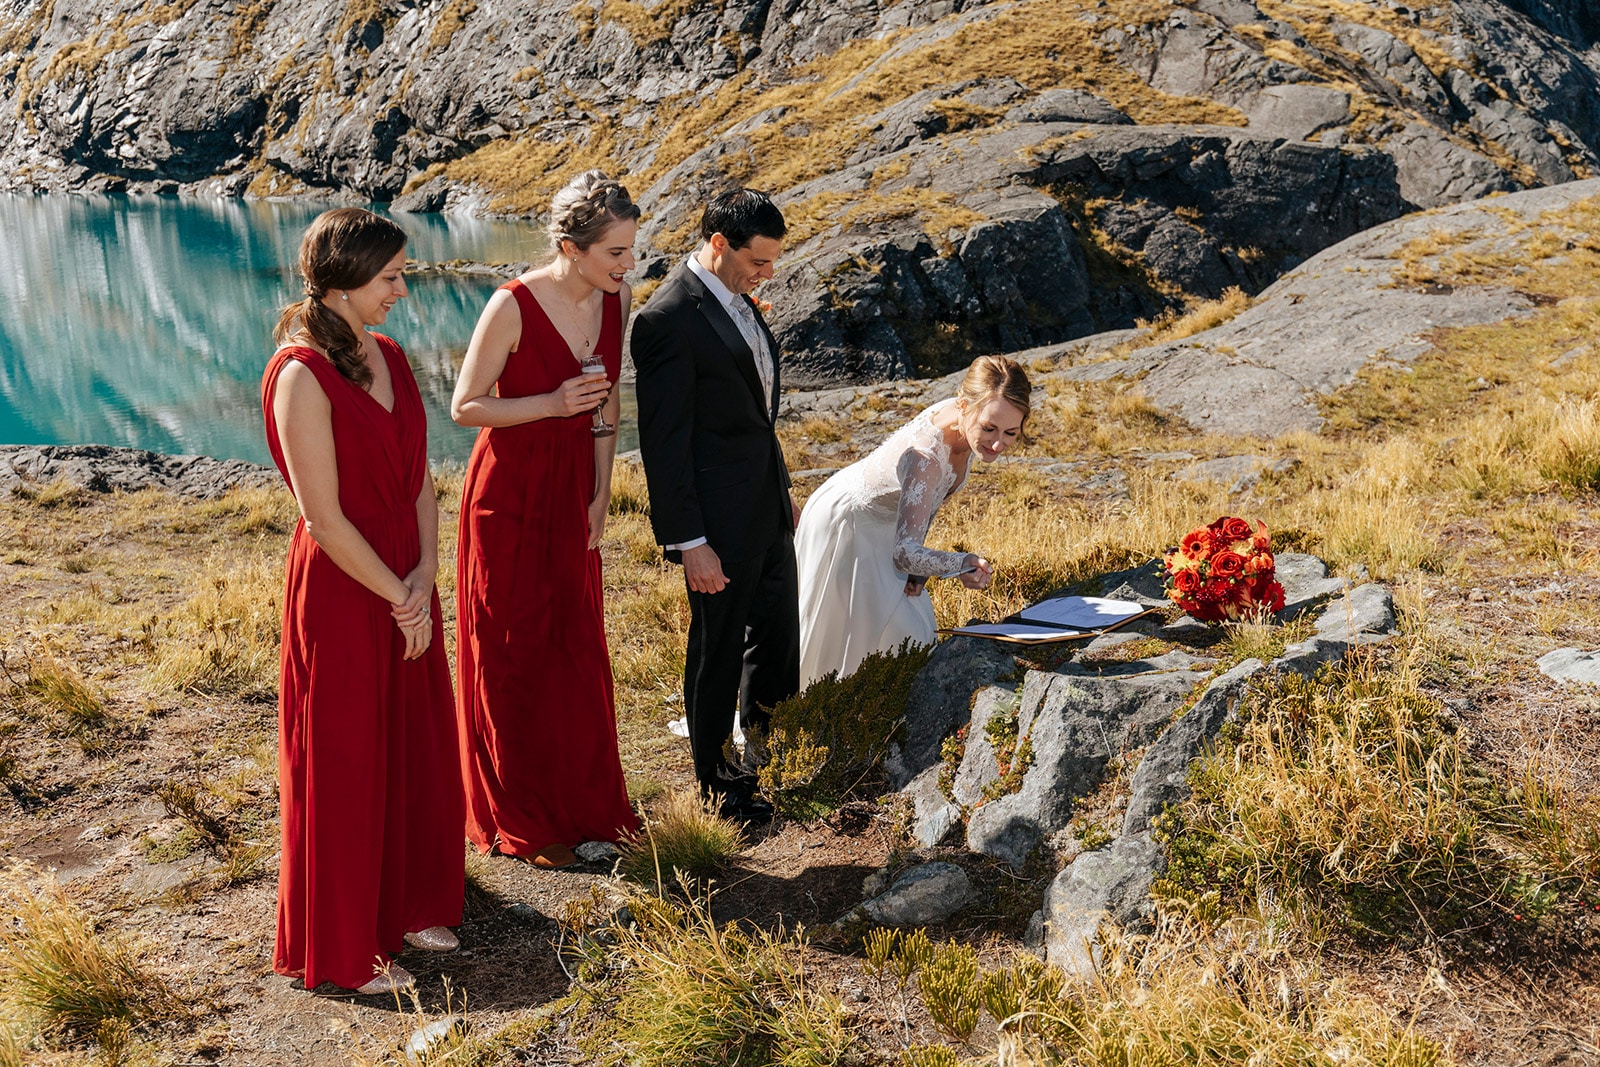 Exclusive Milford Ultimate Wedding in Queenstown with Helicopter